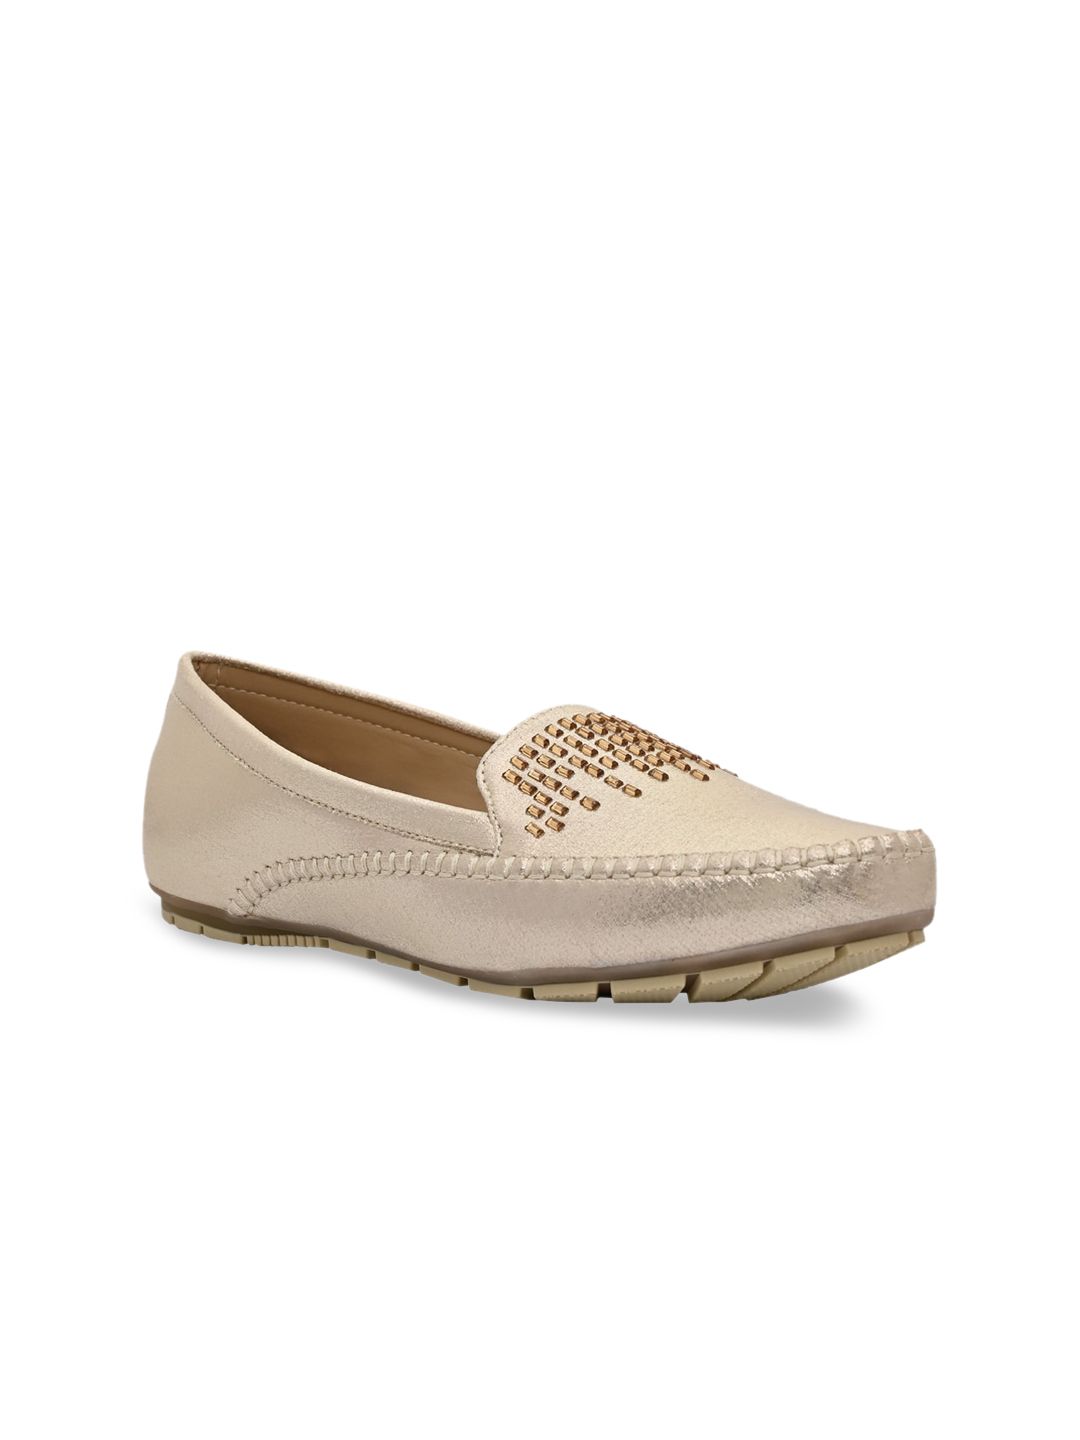 Jove Women Gold-Toned PU Loafers Price in India